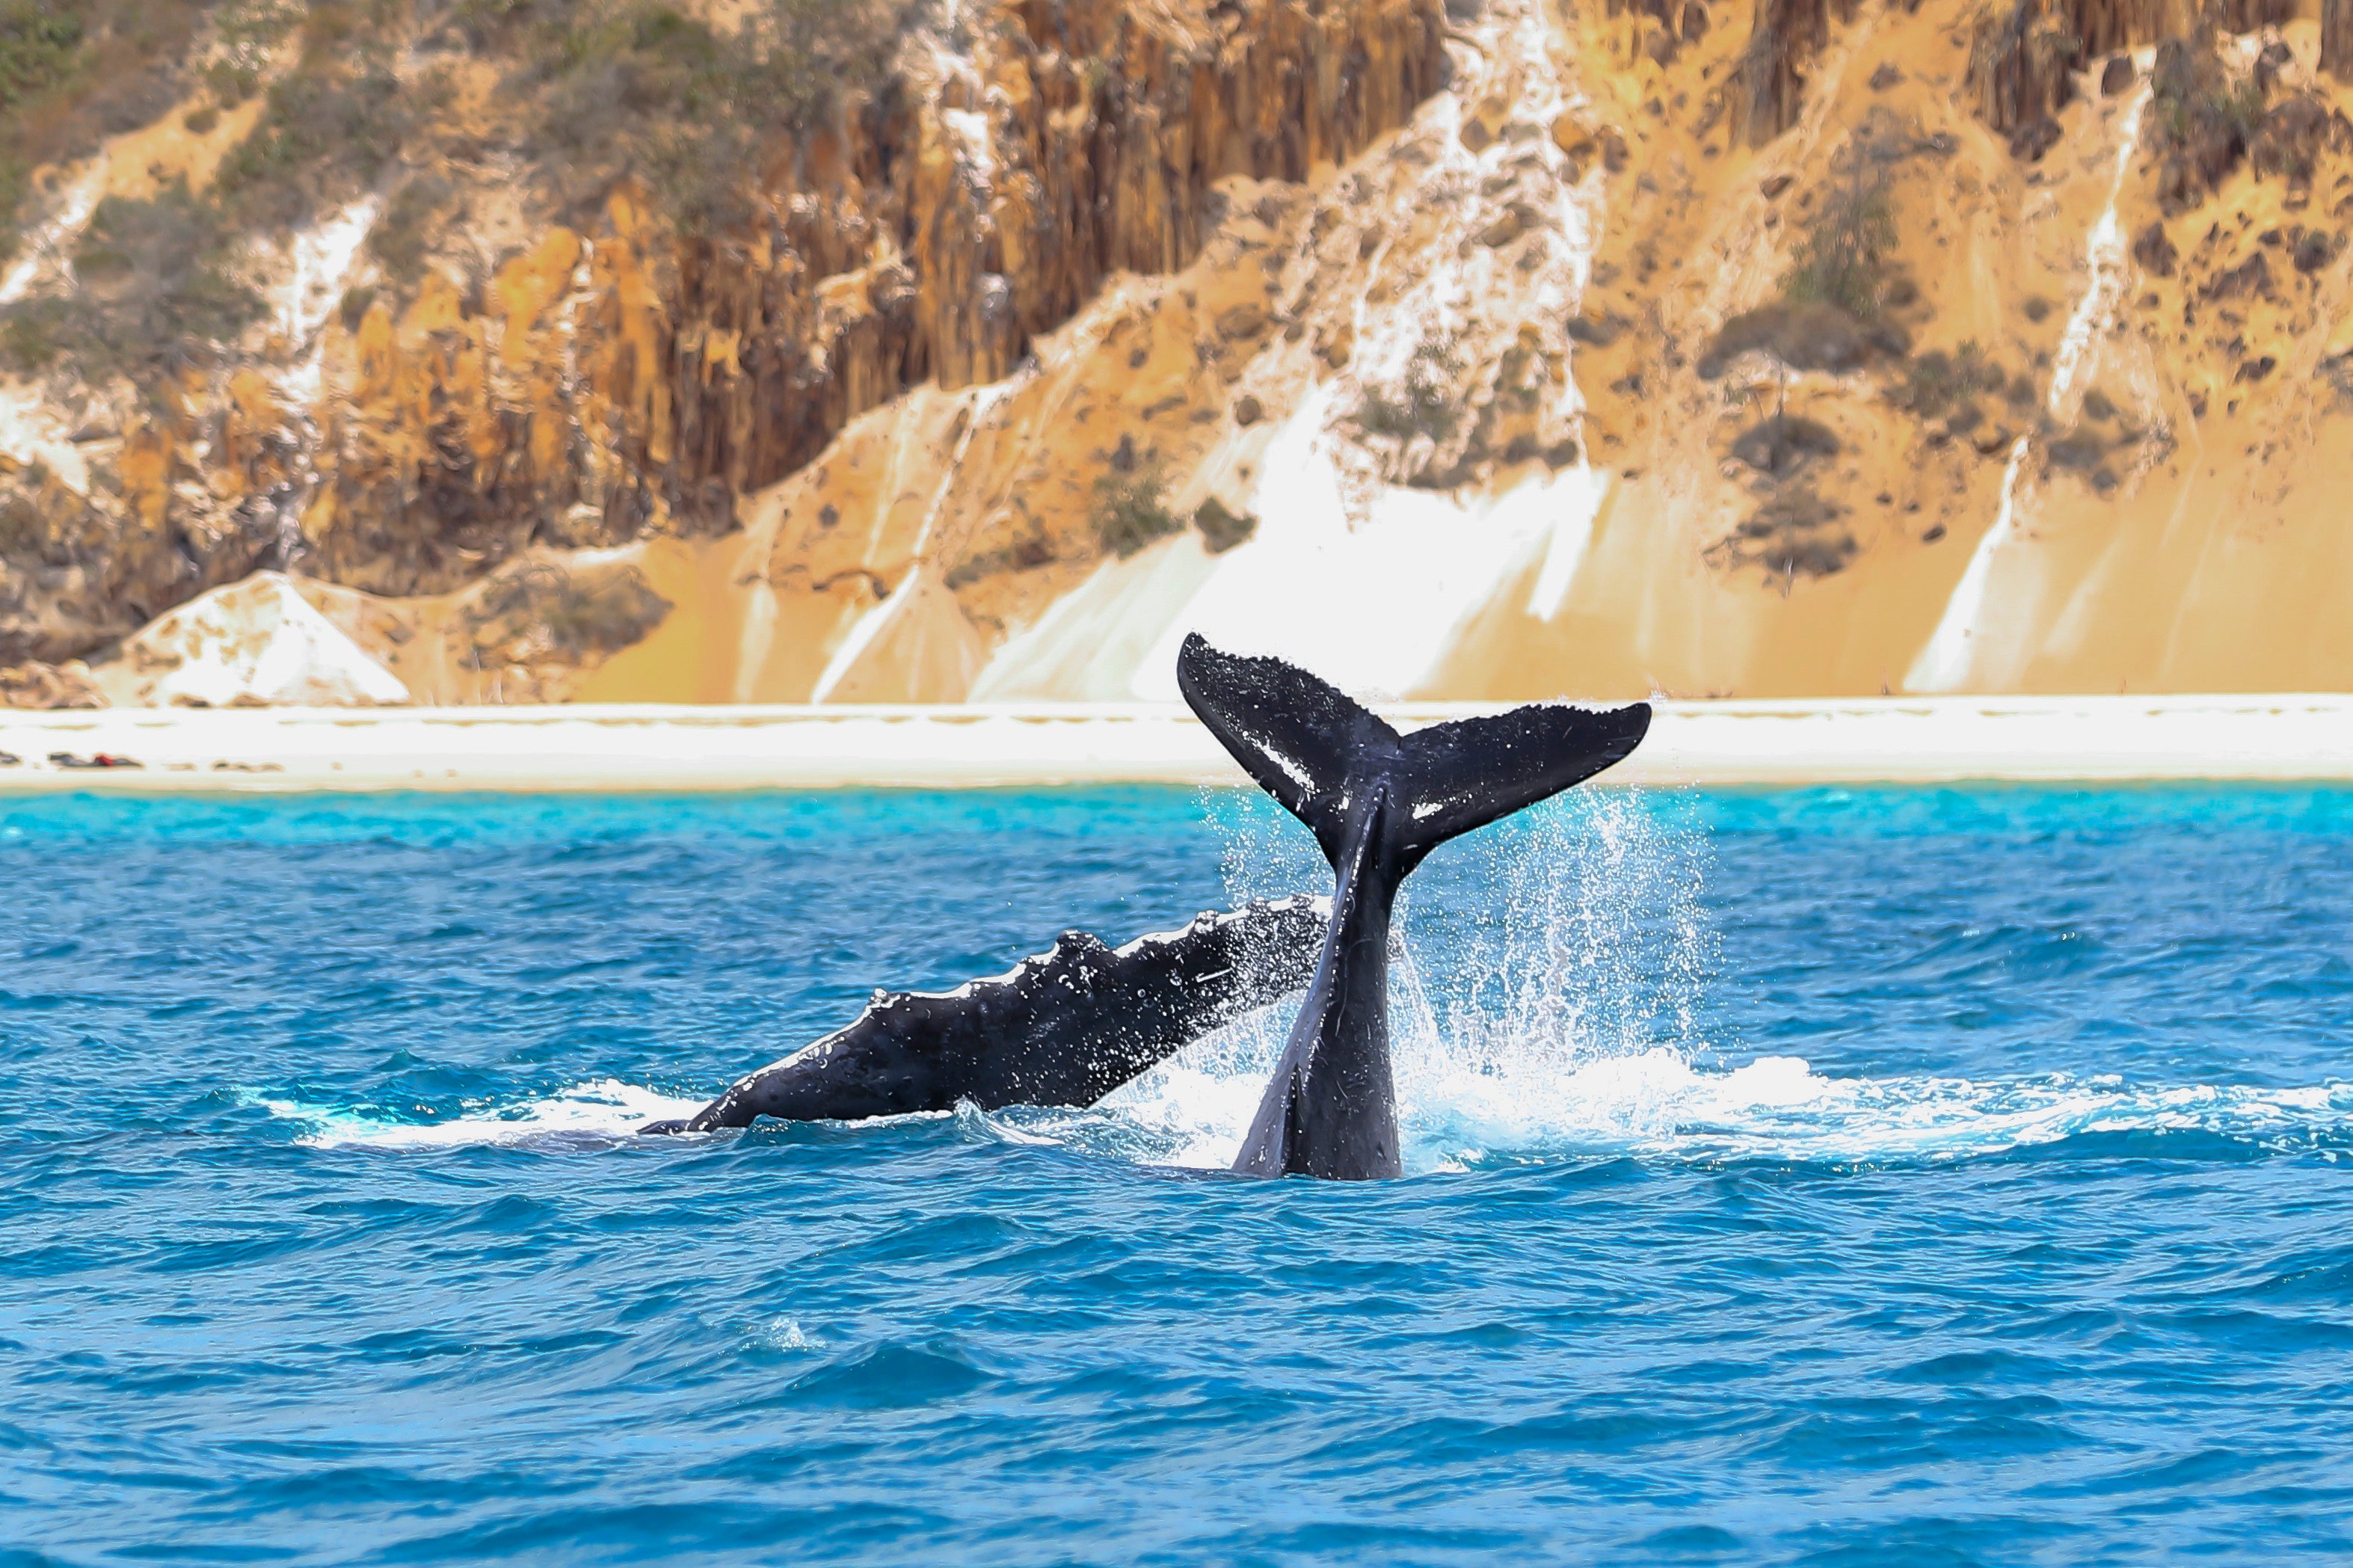 Prepare to experience some unforgettable sights on your Queensland visit, like this mum and calf playing off the coast of K'gari